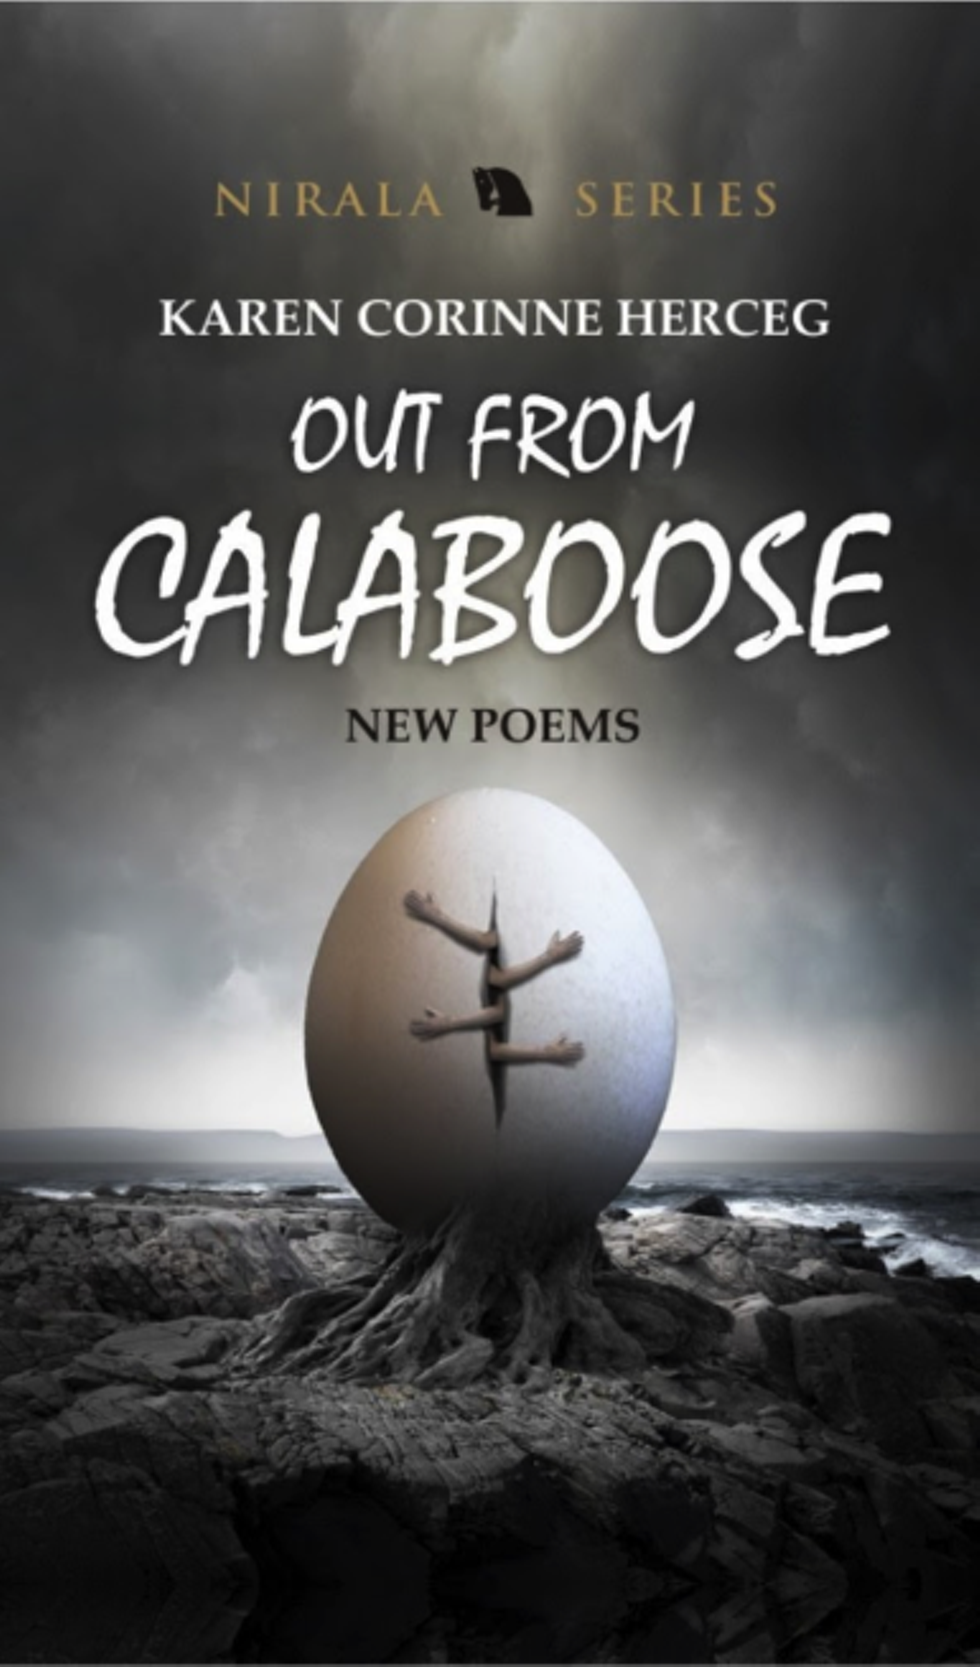 709b4f37_out_from_calaboose_cover_-_website.png